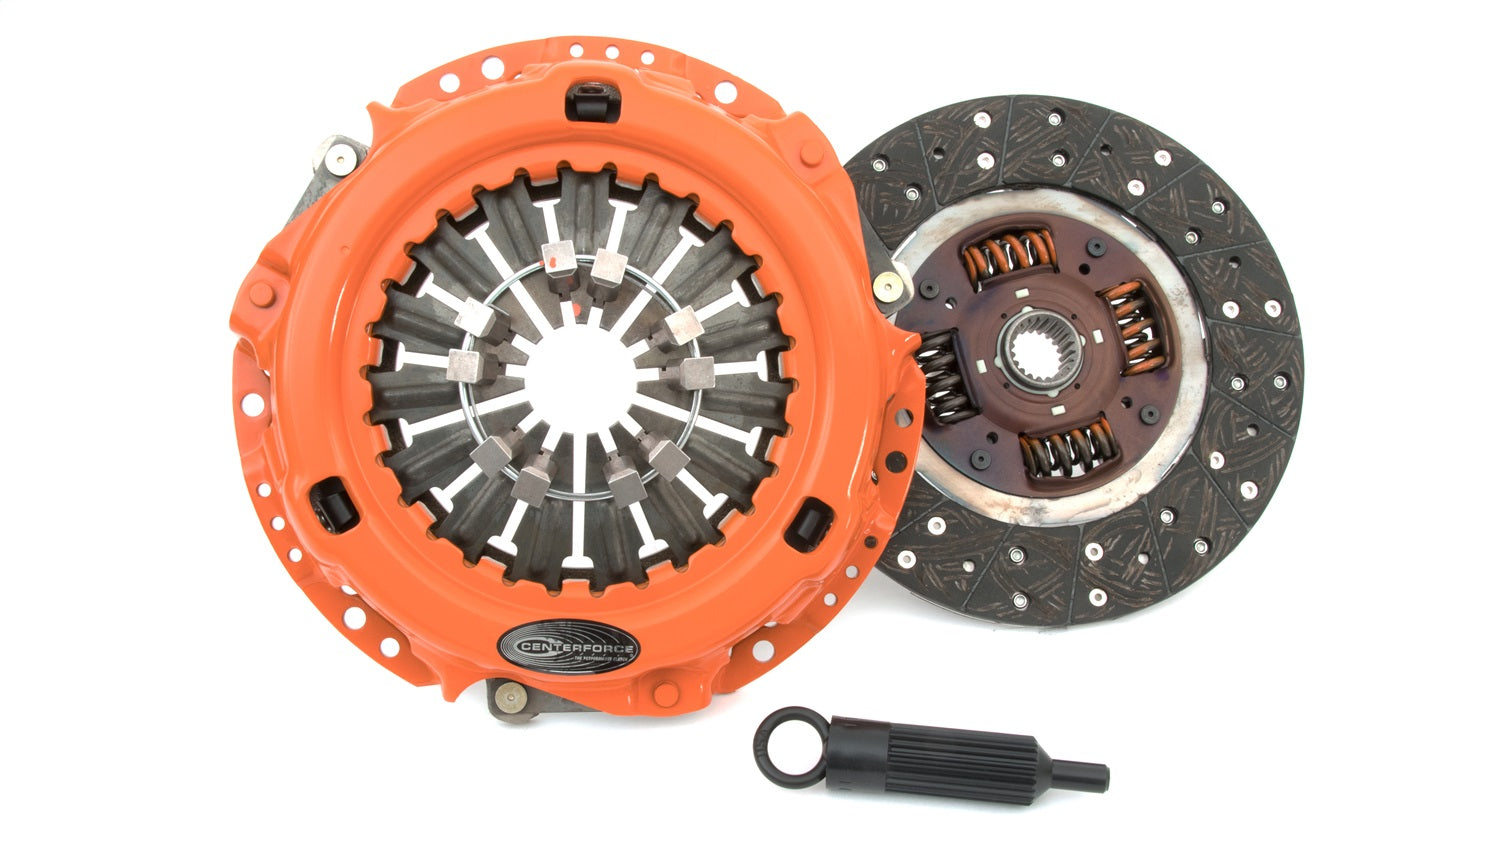 Centerforce DF505019 Dual Friction Clutch Pressure Plate And Disc Set